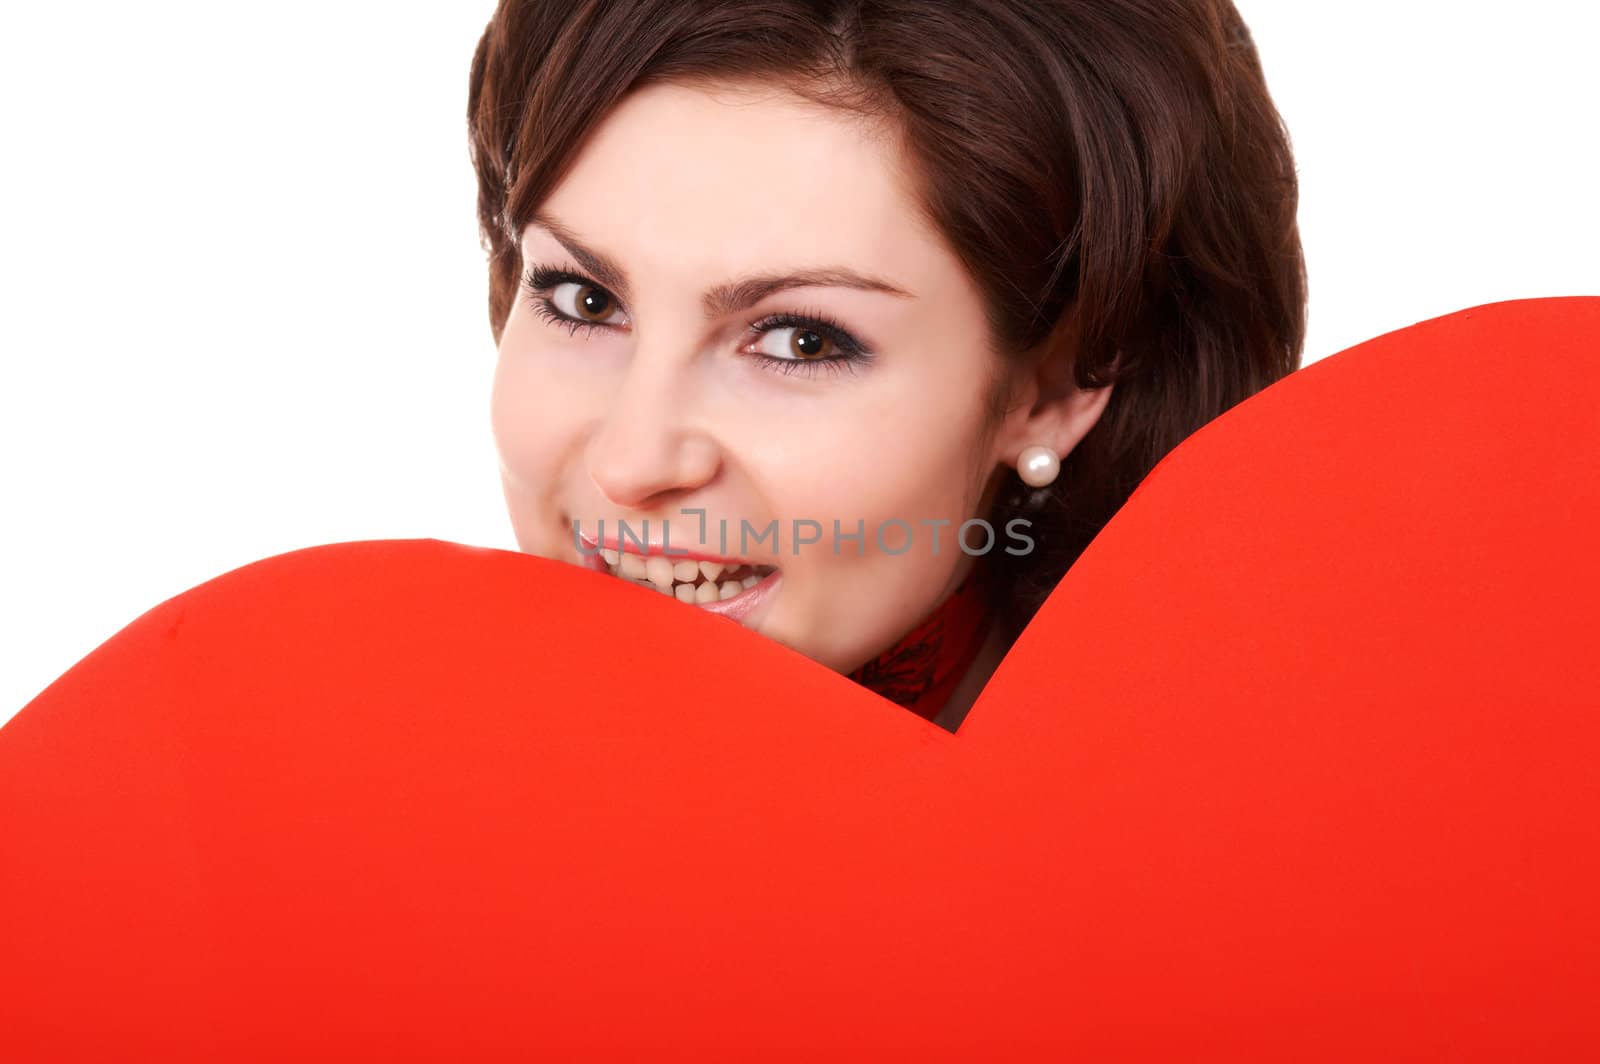 A girl keeps a big red paper heart